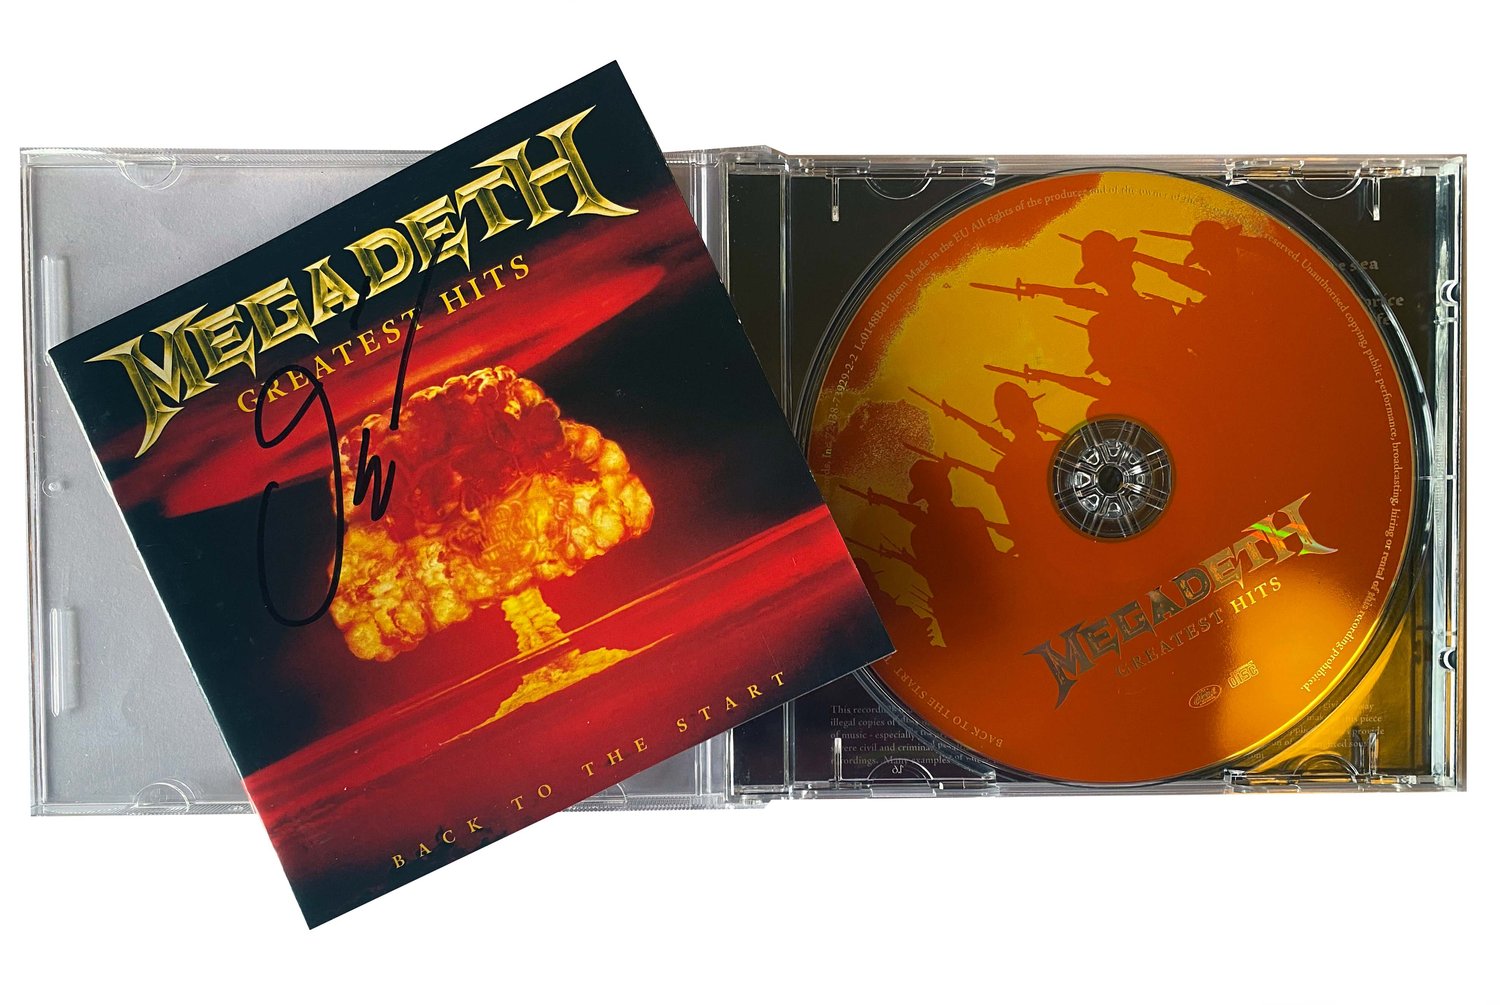 Image of MEGADETH - Greatest Hits, Back To The Start - AUTOGRAPHED CD (Just David)